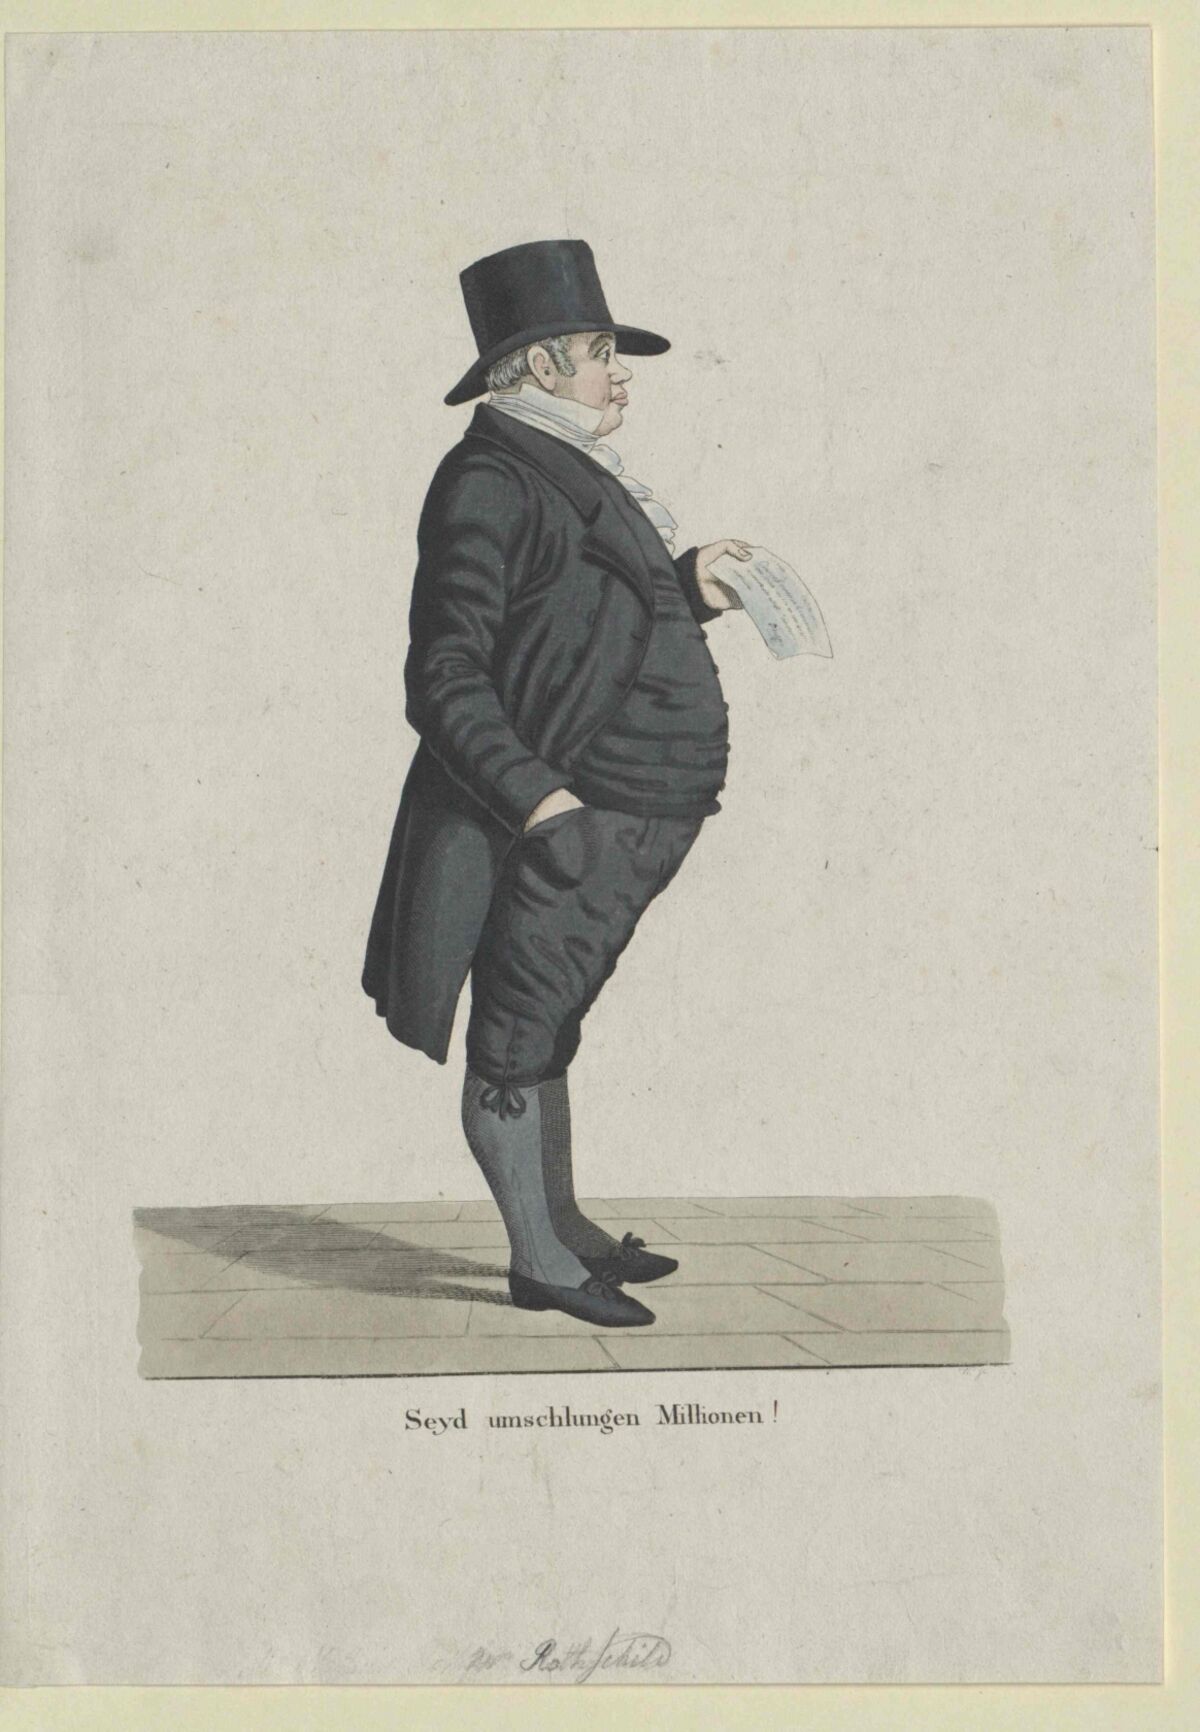 GFD 1/181: Caricature of Nathan Mayer Rothschild (artist unknown, 1817)